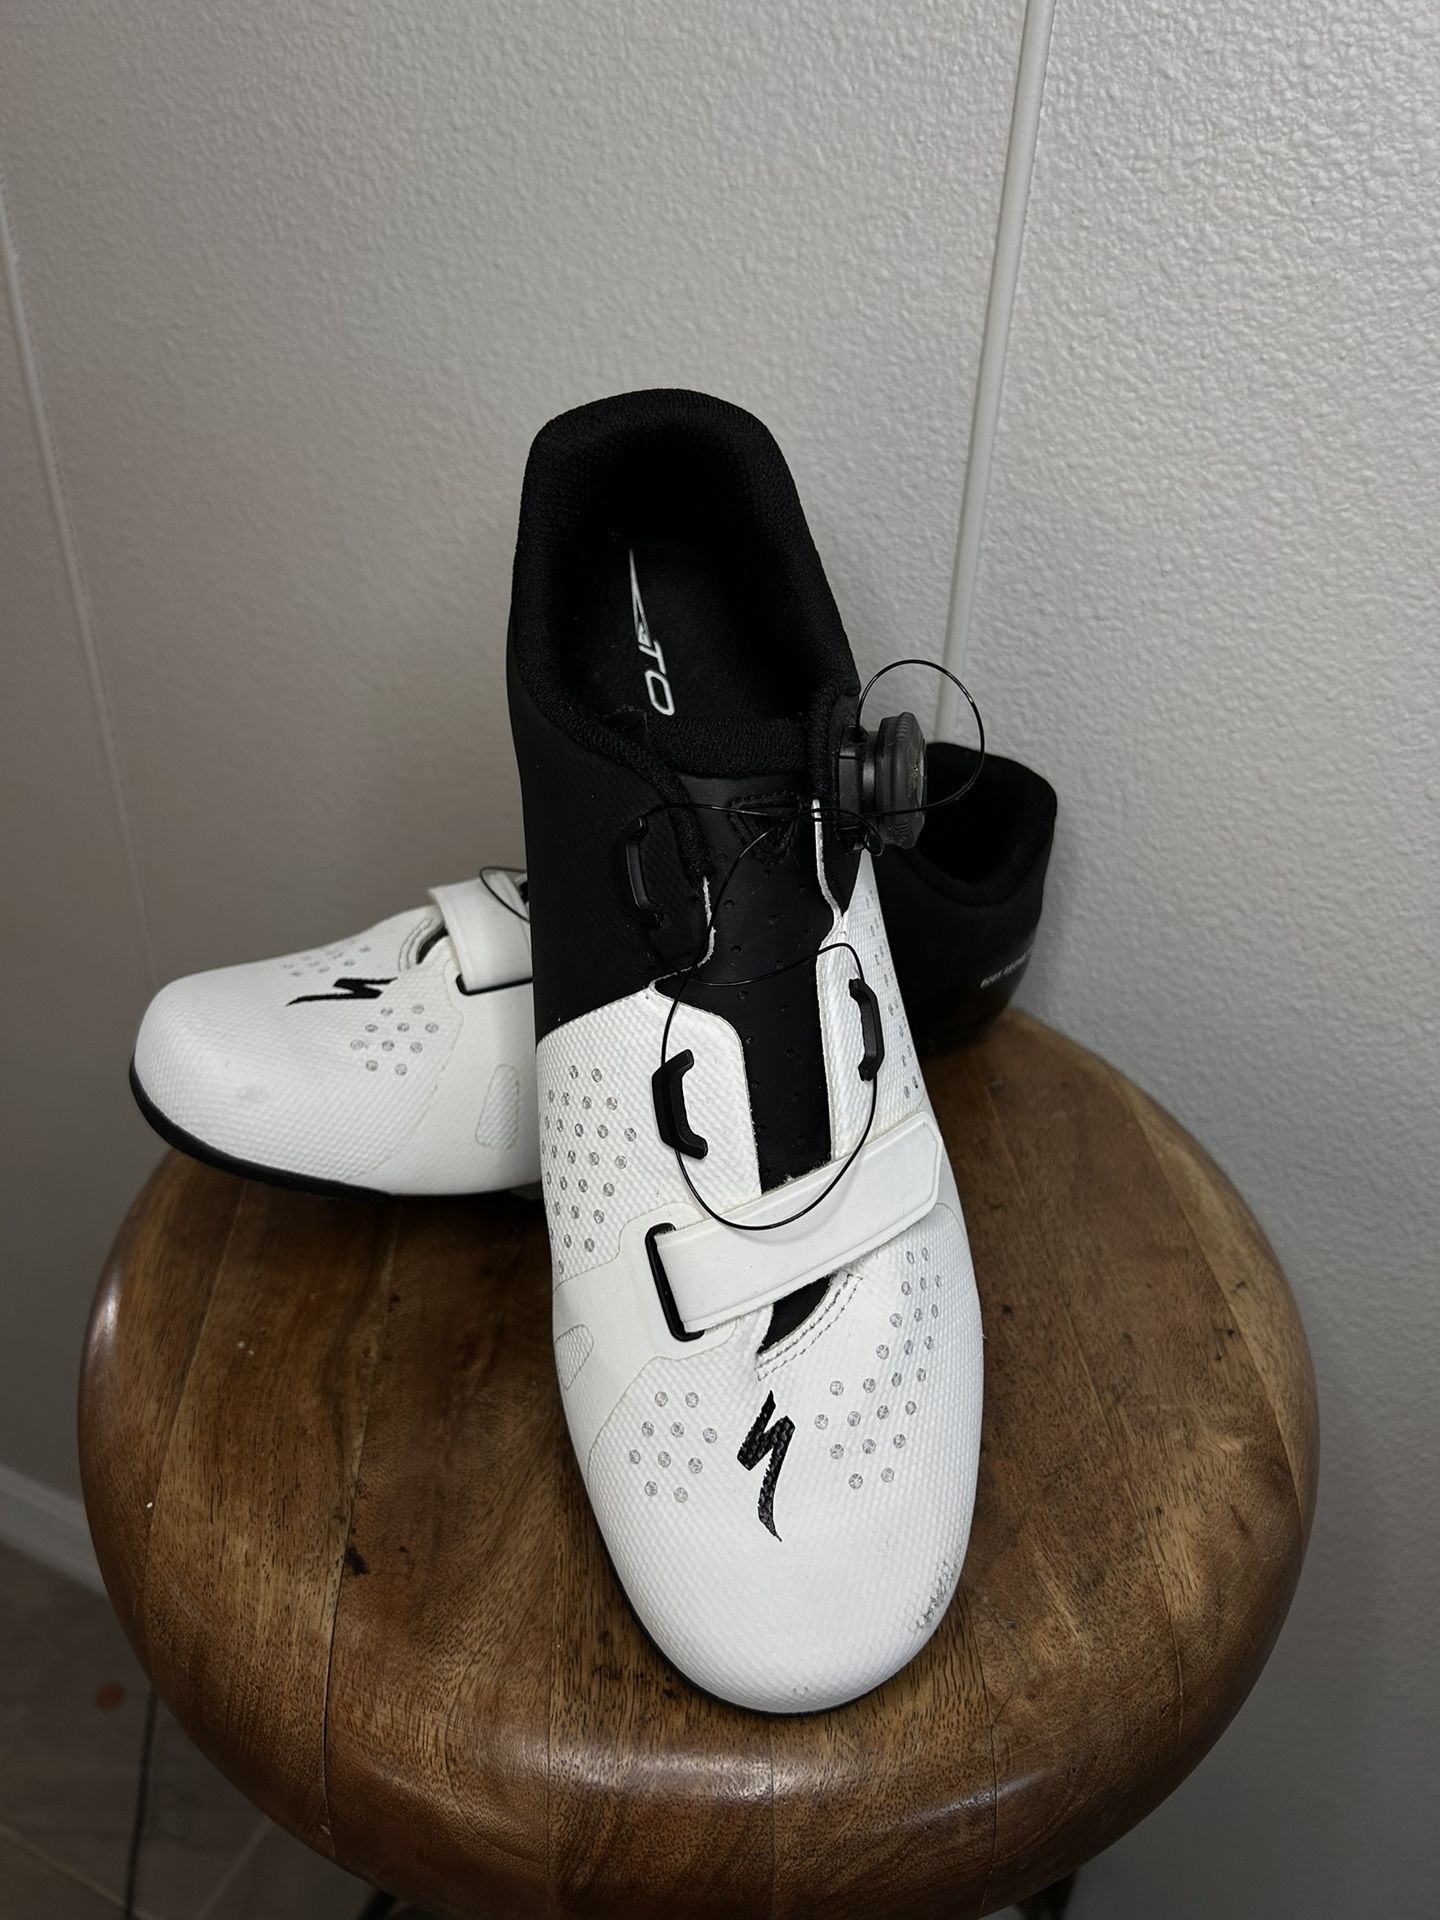 Specialized Torch 2.0 Road Cycling Shoes - Gently Used - Men’s Size 11 - $100- Orlando Pickup/Meetup